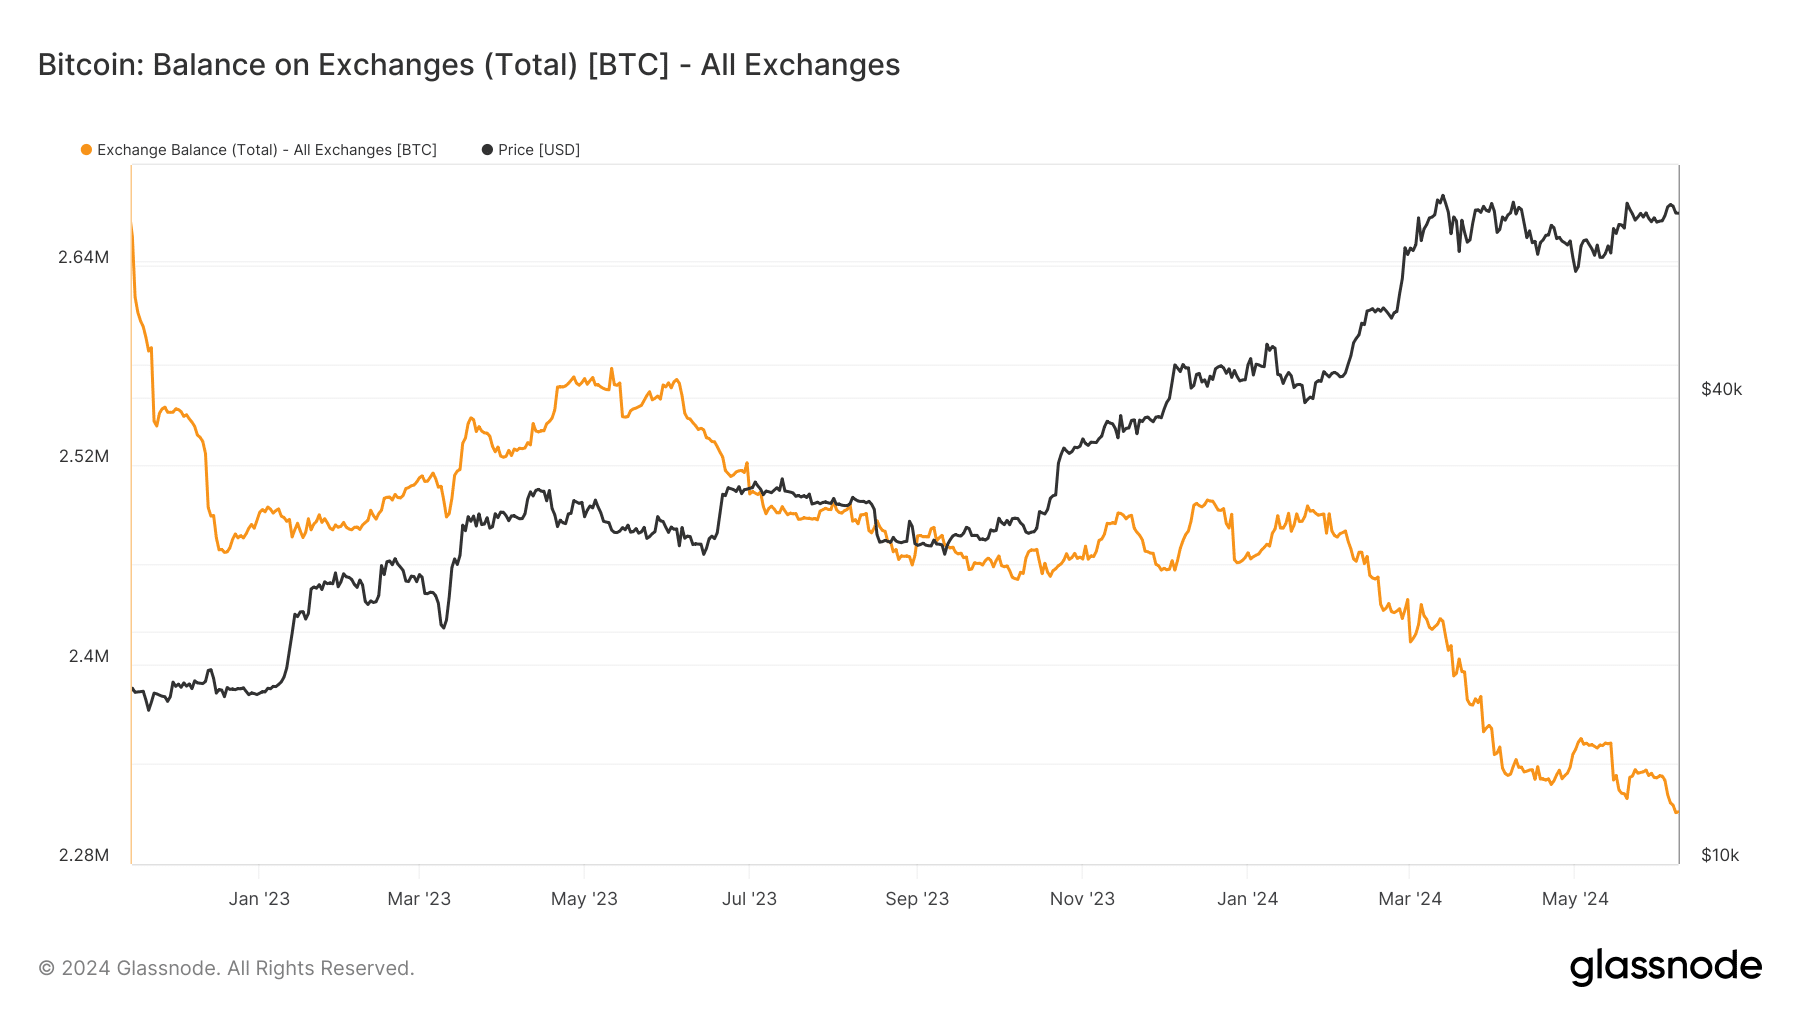 Bitcoin supply on exchanges